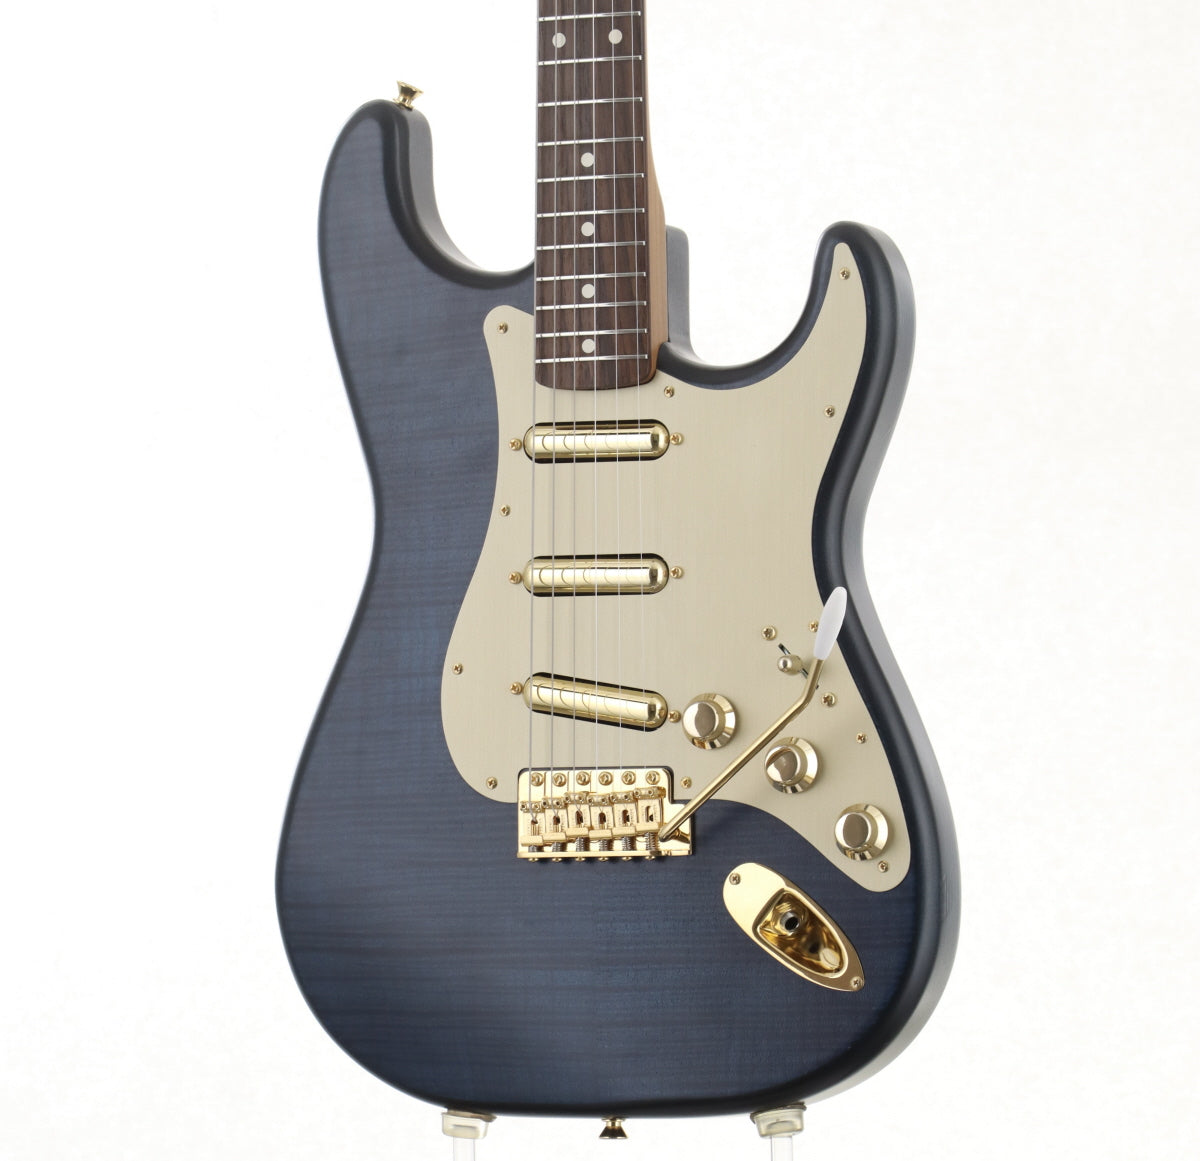 [SN JD20005813] USED FENDER MADE IN JAPAN / Made in Japan 2020 Limited Collection Stratocaster Rosewood Fingerboard NaturalIndigo Dye [08]